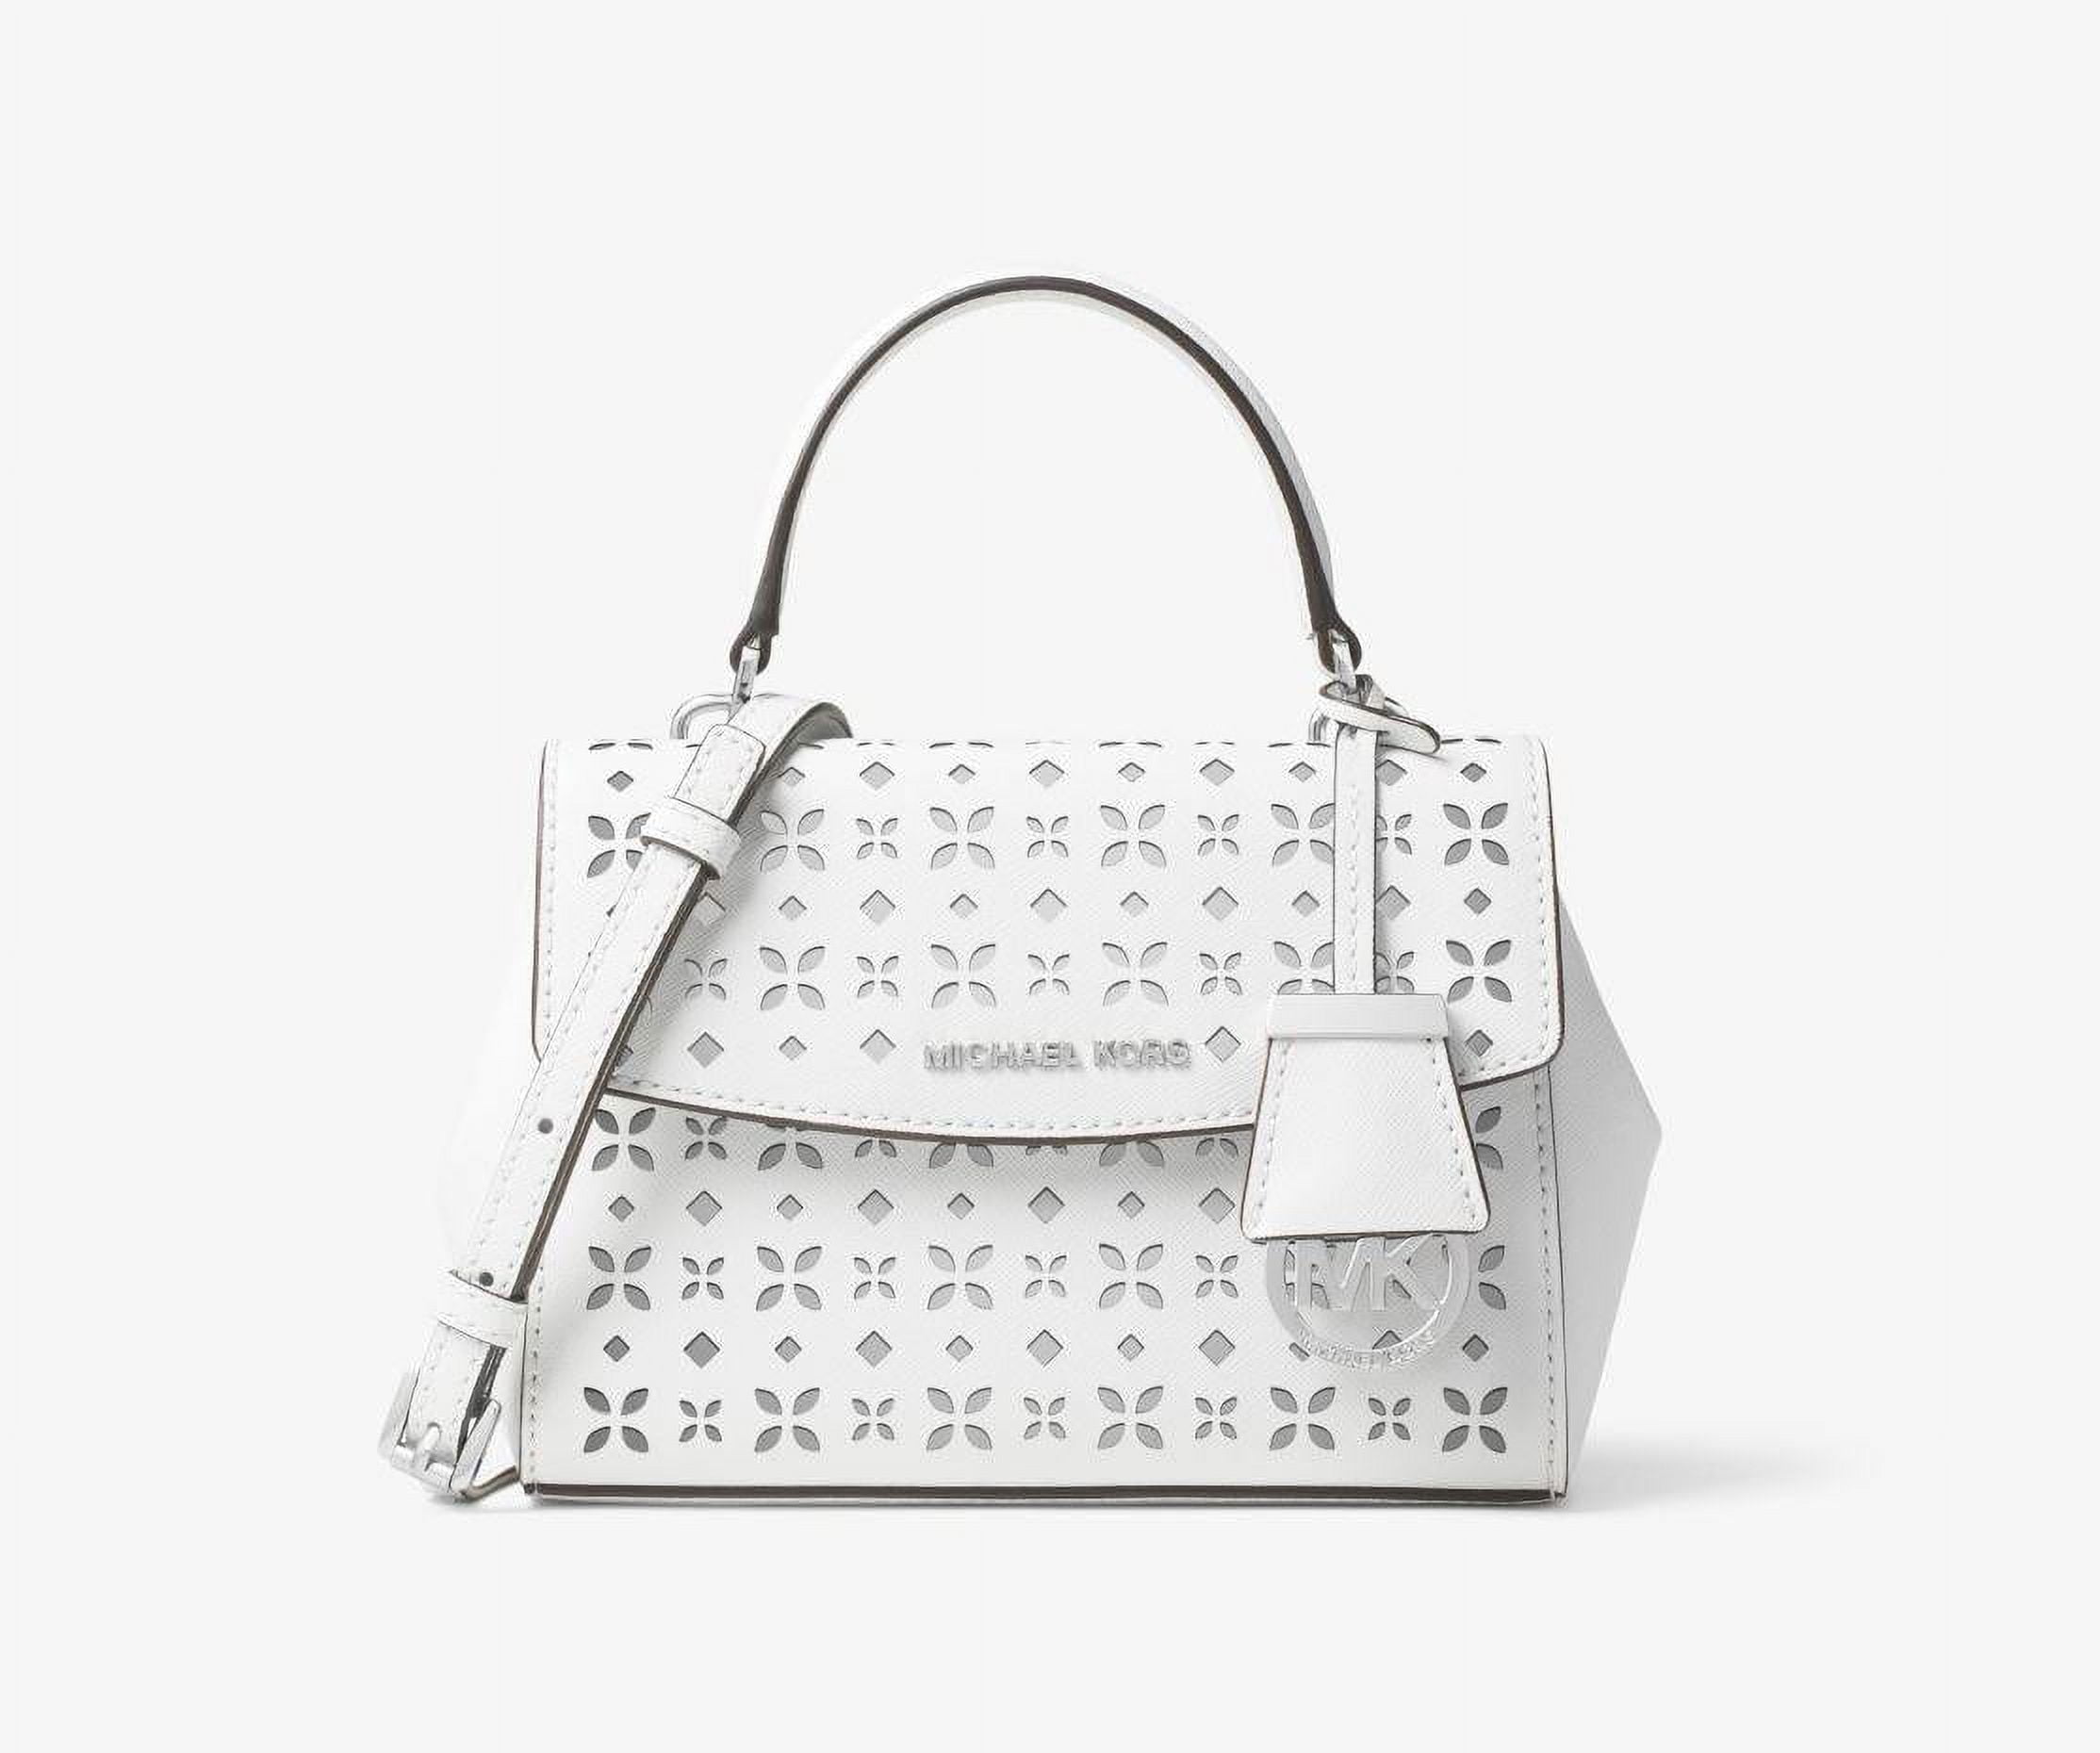 Ava Extra-Small Perforated-Leather Crossbody - White/Silver -  32T6SAVC5U-764 